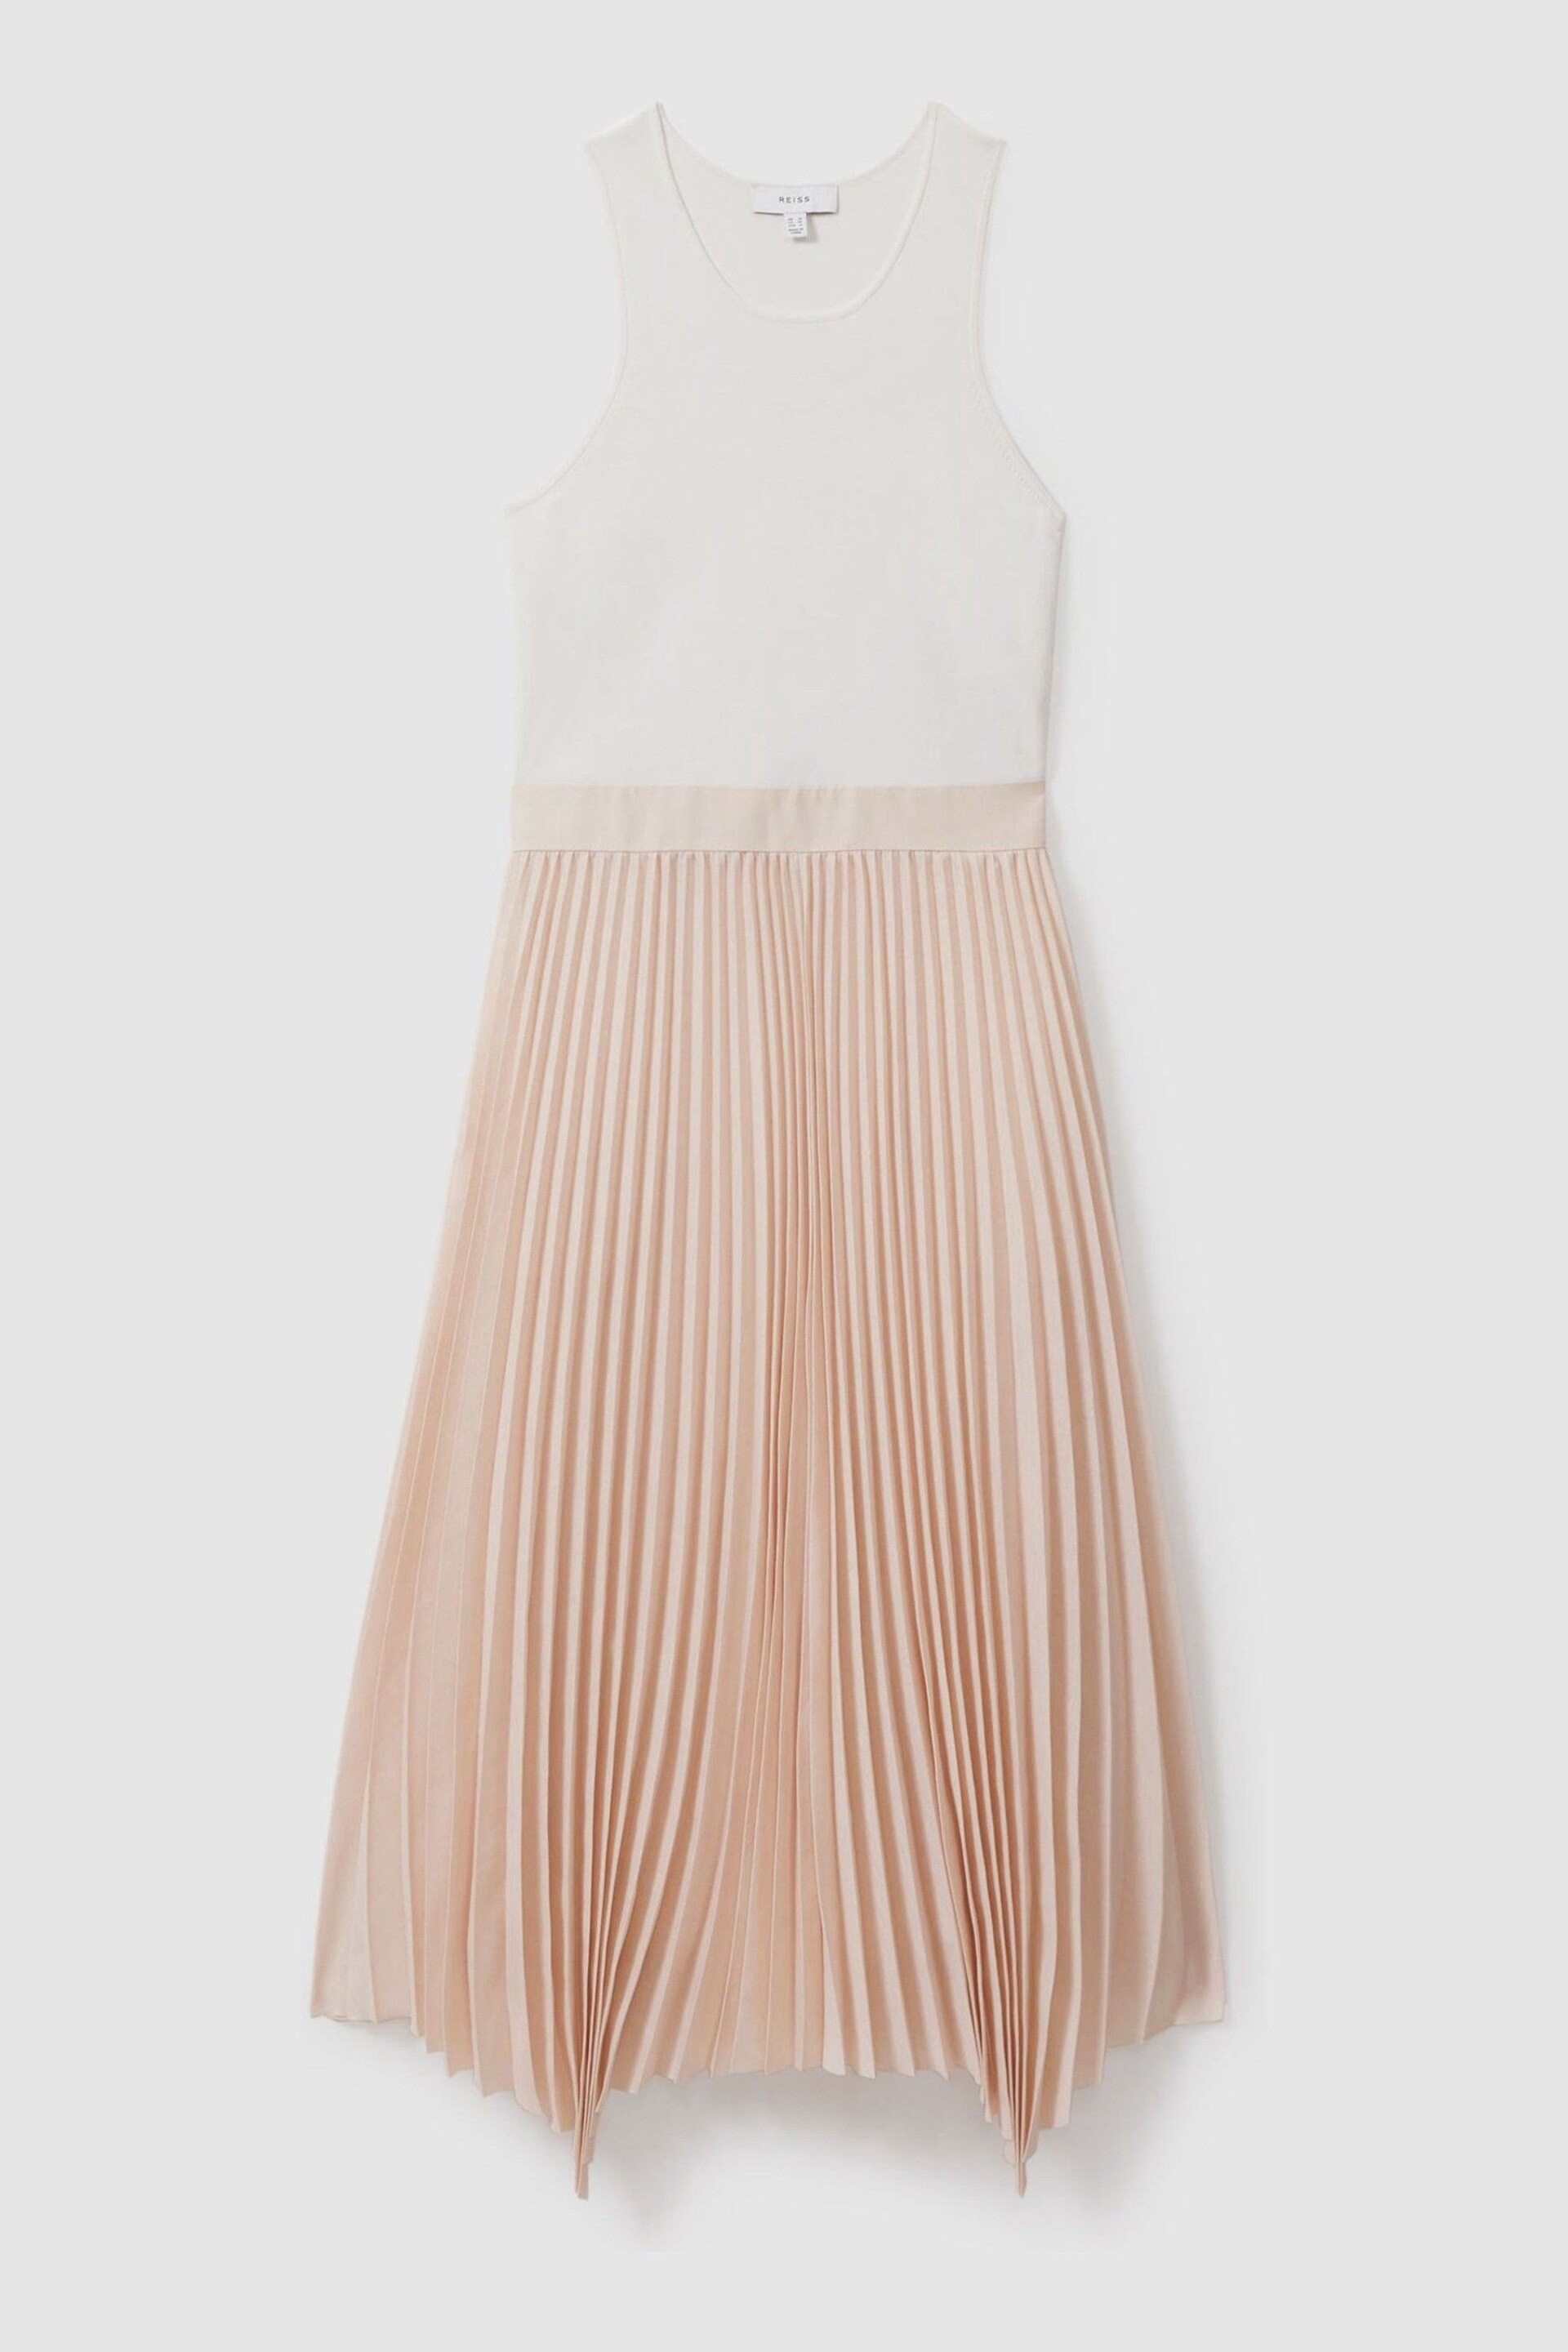 Reiss Ivory/Nude Marnie Hybrid Knitted Midi Dress - Image 2 of 5